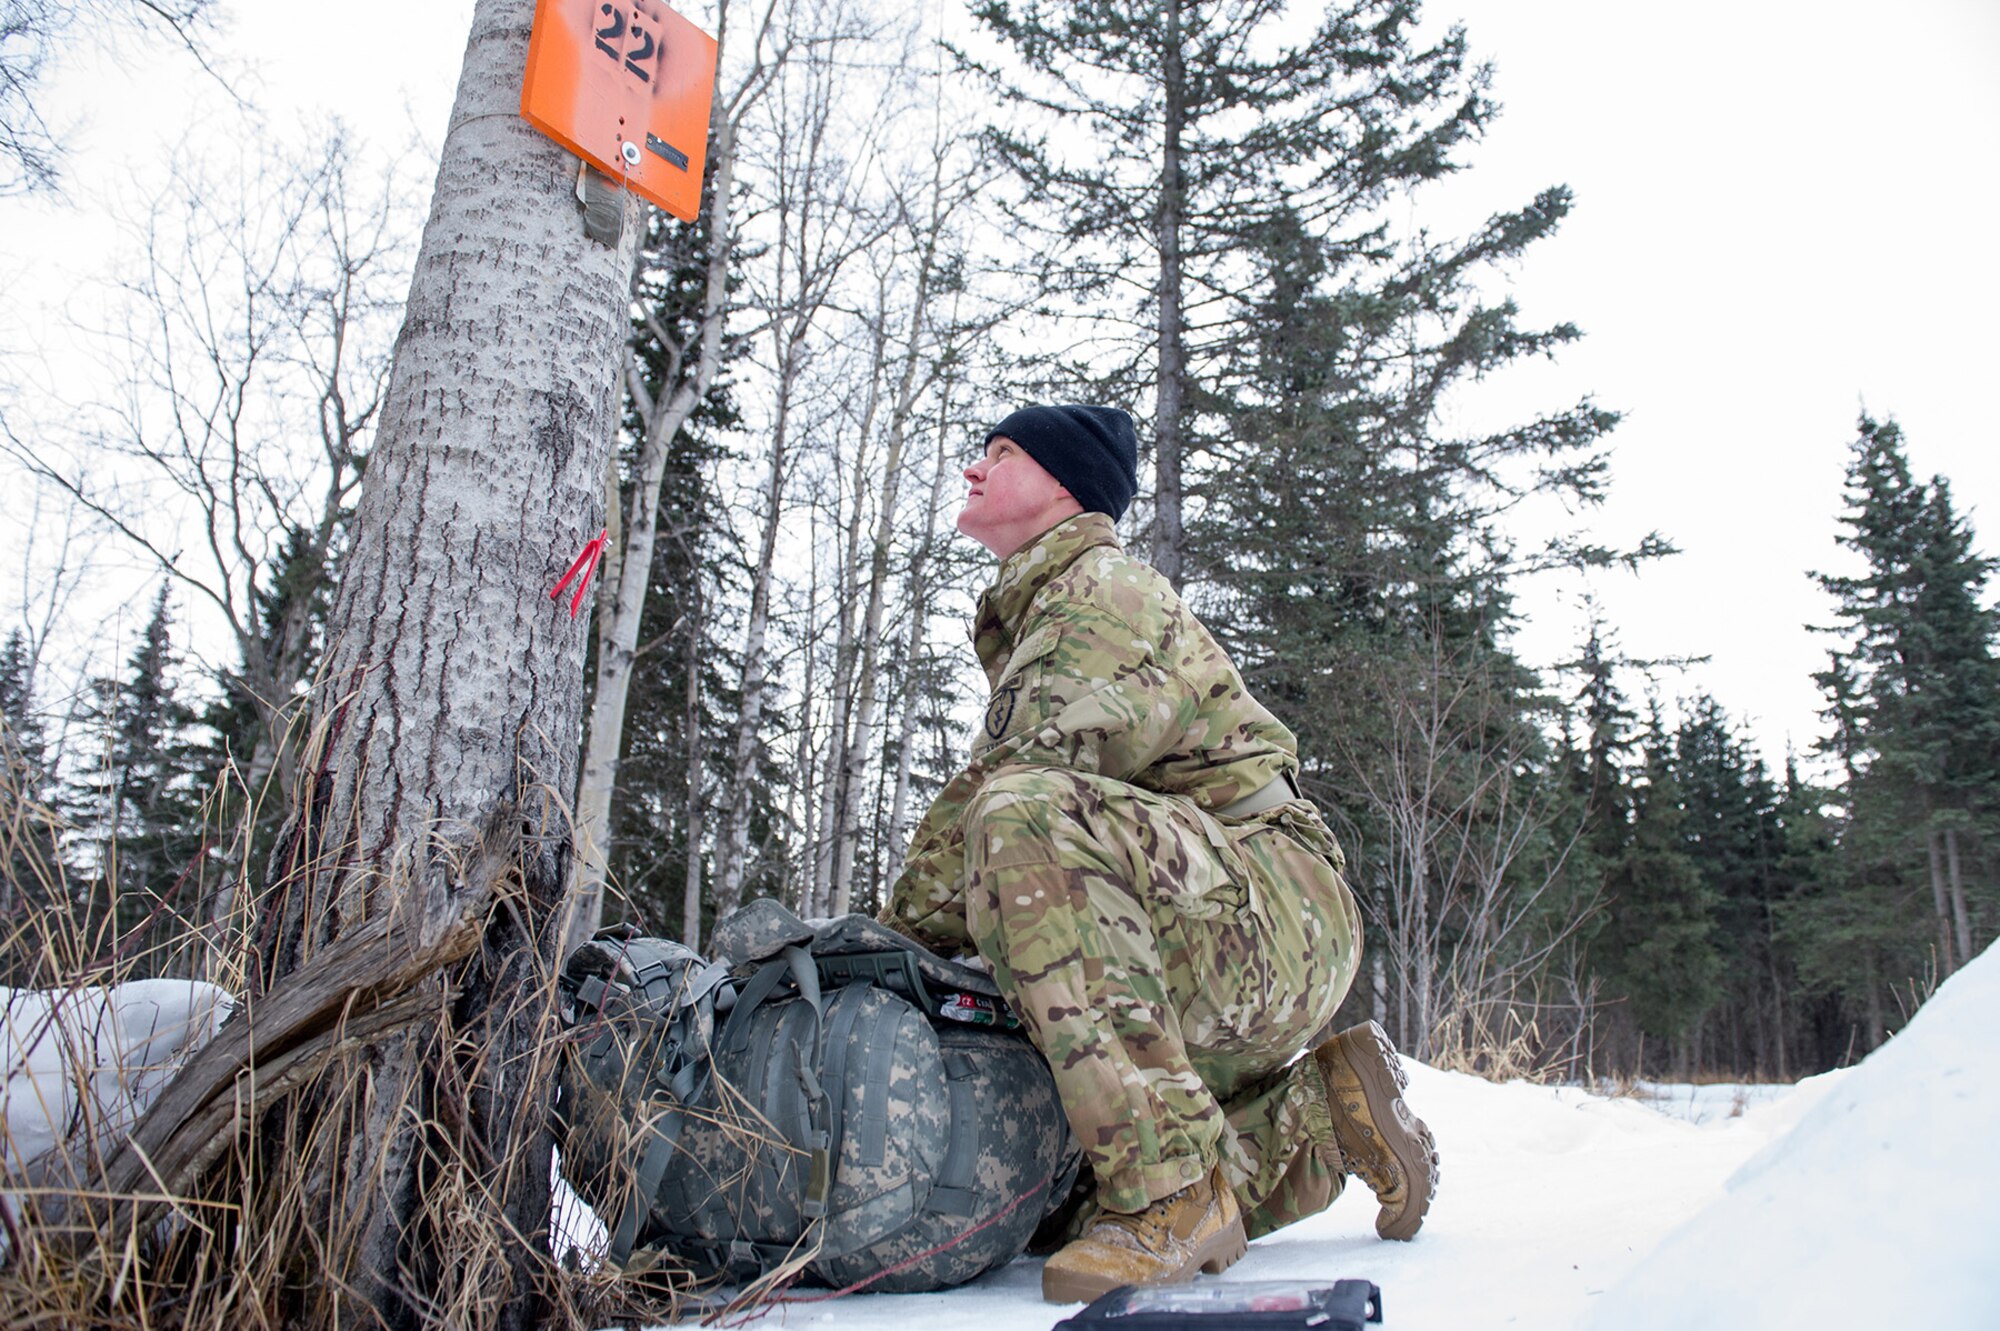 Army 2nd Lt. Brian Morrow, a native of Dahlonega, Ga., assigned to Grindstone Company, 1st Battalion, 501st Parachute Infantry Regiment, 4th Infantry Brigade Combat Team (Airborne), 25th Infantry Division, U.S. Army Alaska, calculates his position during a land navigation course on Joint Base Elmendorf-Richardson, Alaska, April 4, 2018.  Morrow used his skills to plot courses using a lensatic compass, protractor, and a 1:25,000 scale map to navigate to, and locate points using provided grid coordinates within a predetermined time.